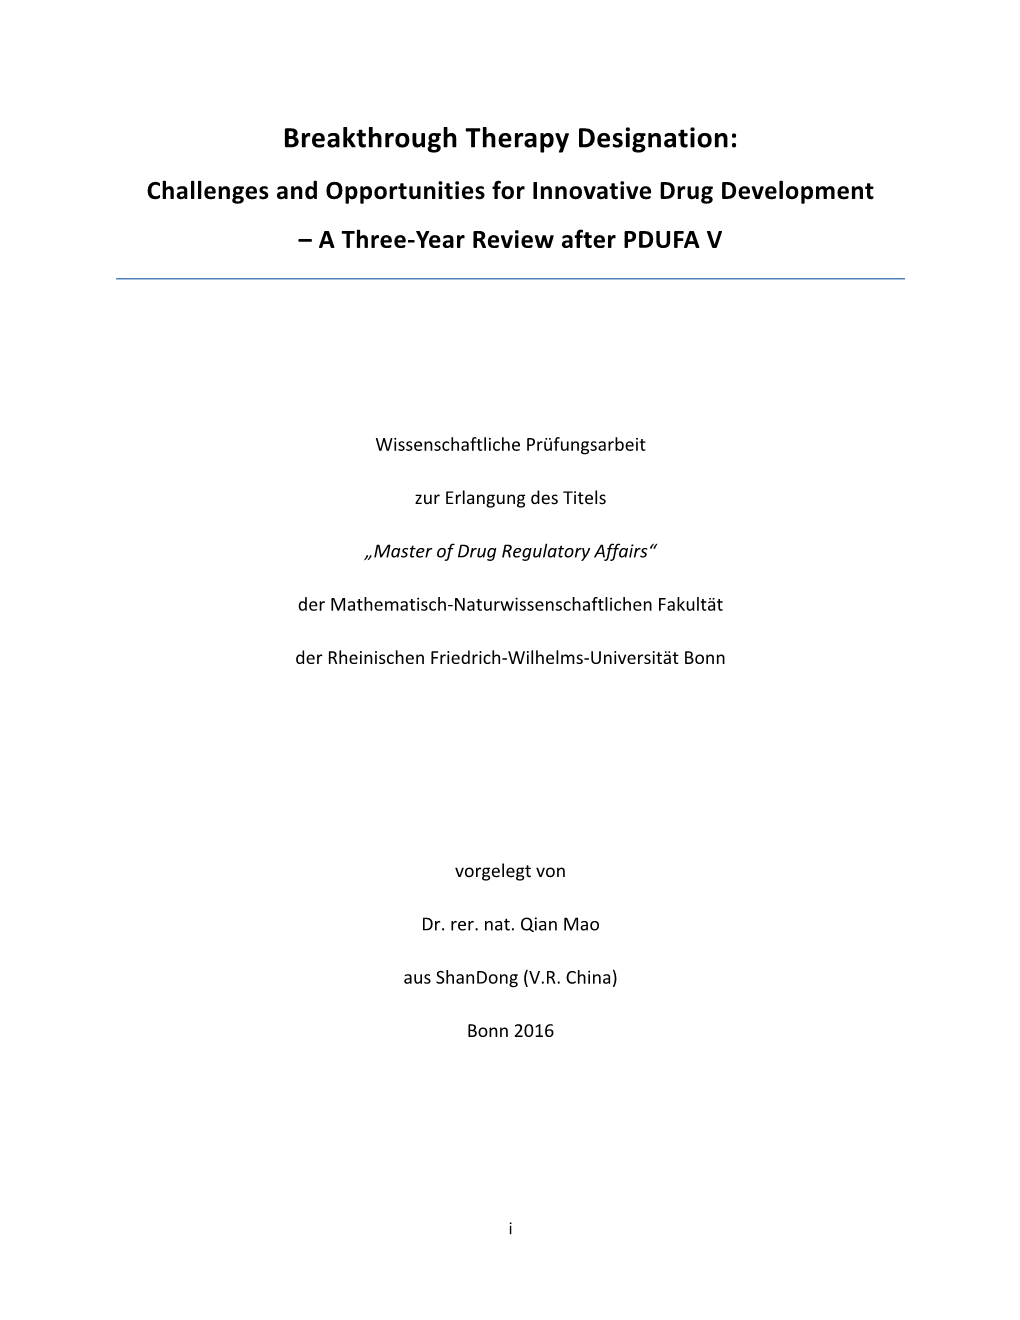 Breakthrough Therapy Designation: Challenges and Opportunities for Innovative Drug Development – a Three-Year Review After PDUFA V